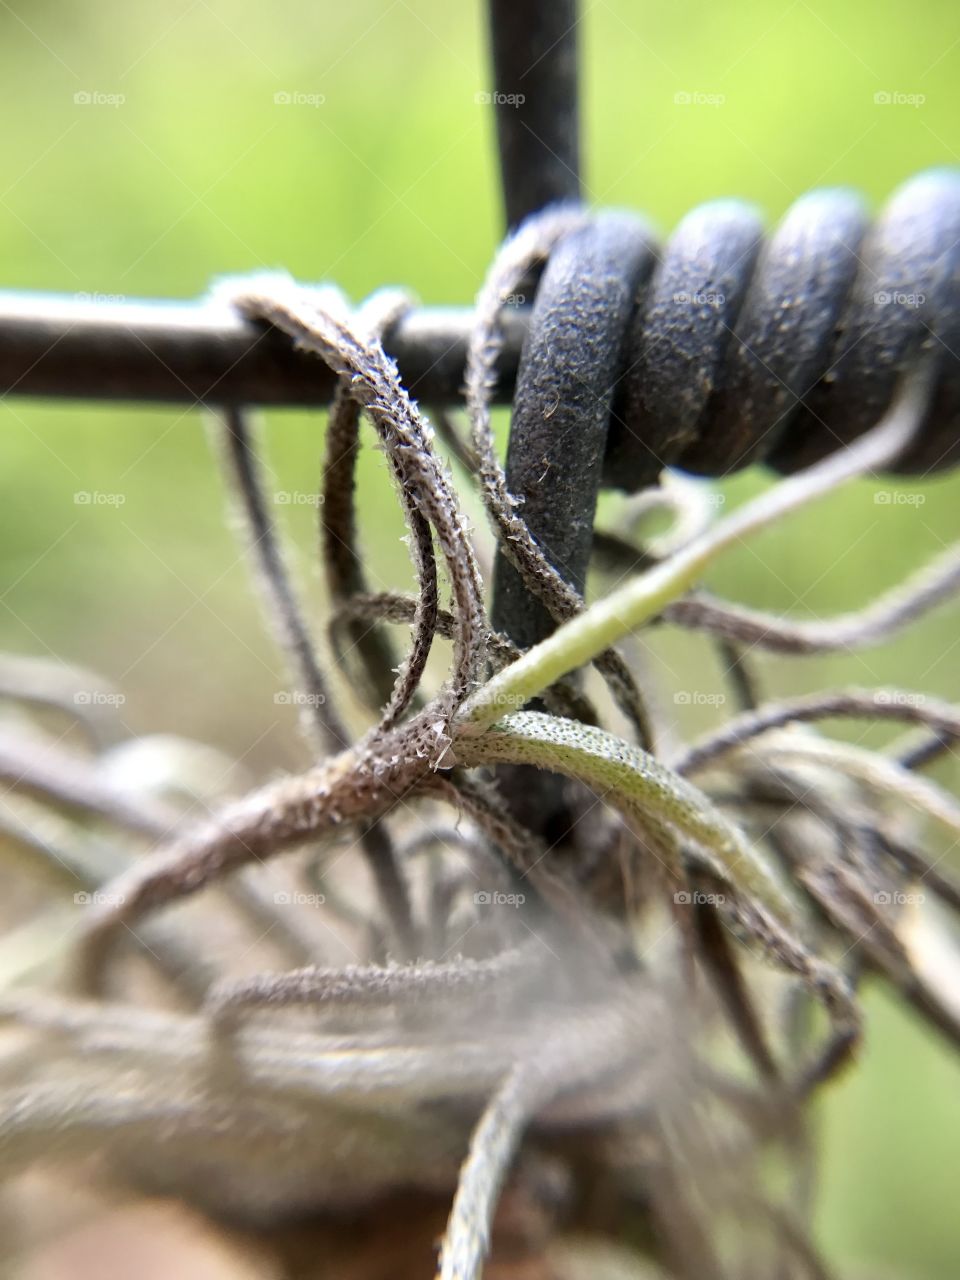 Barb wire and a plant